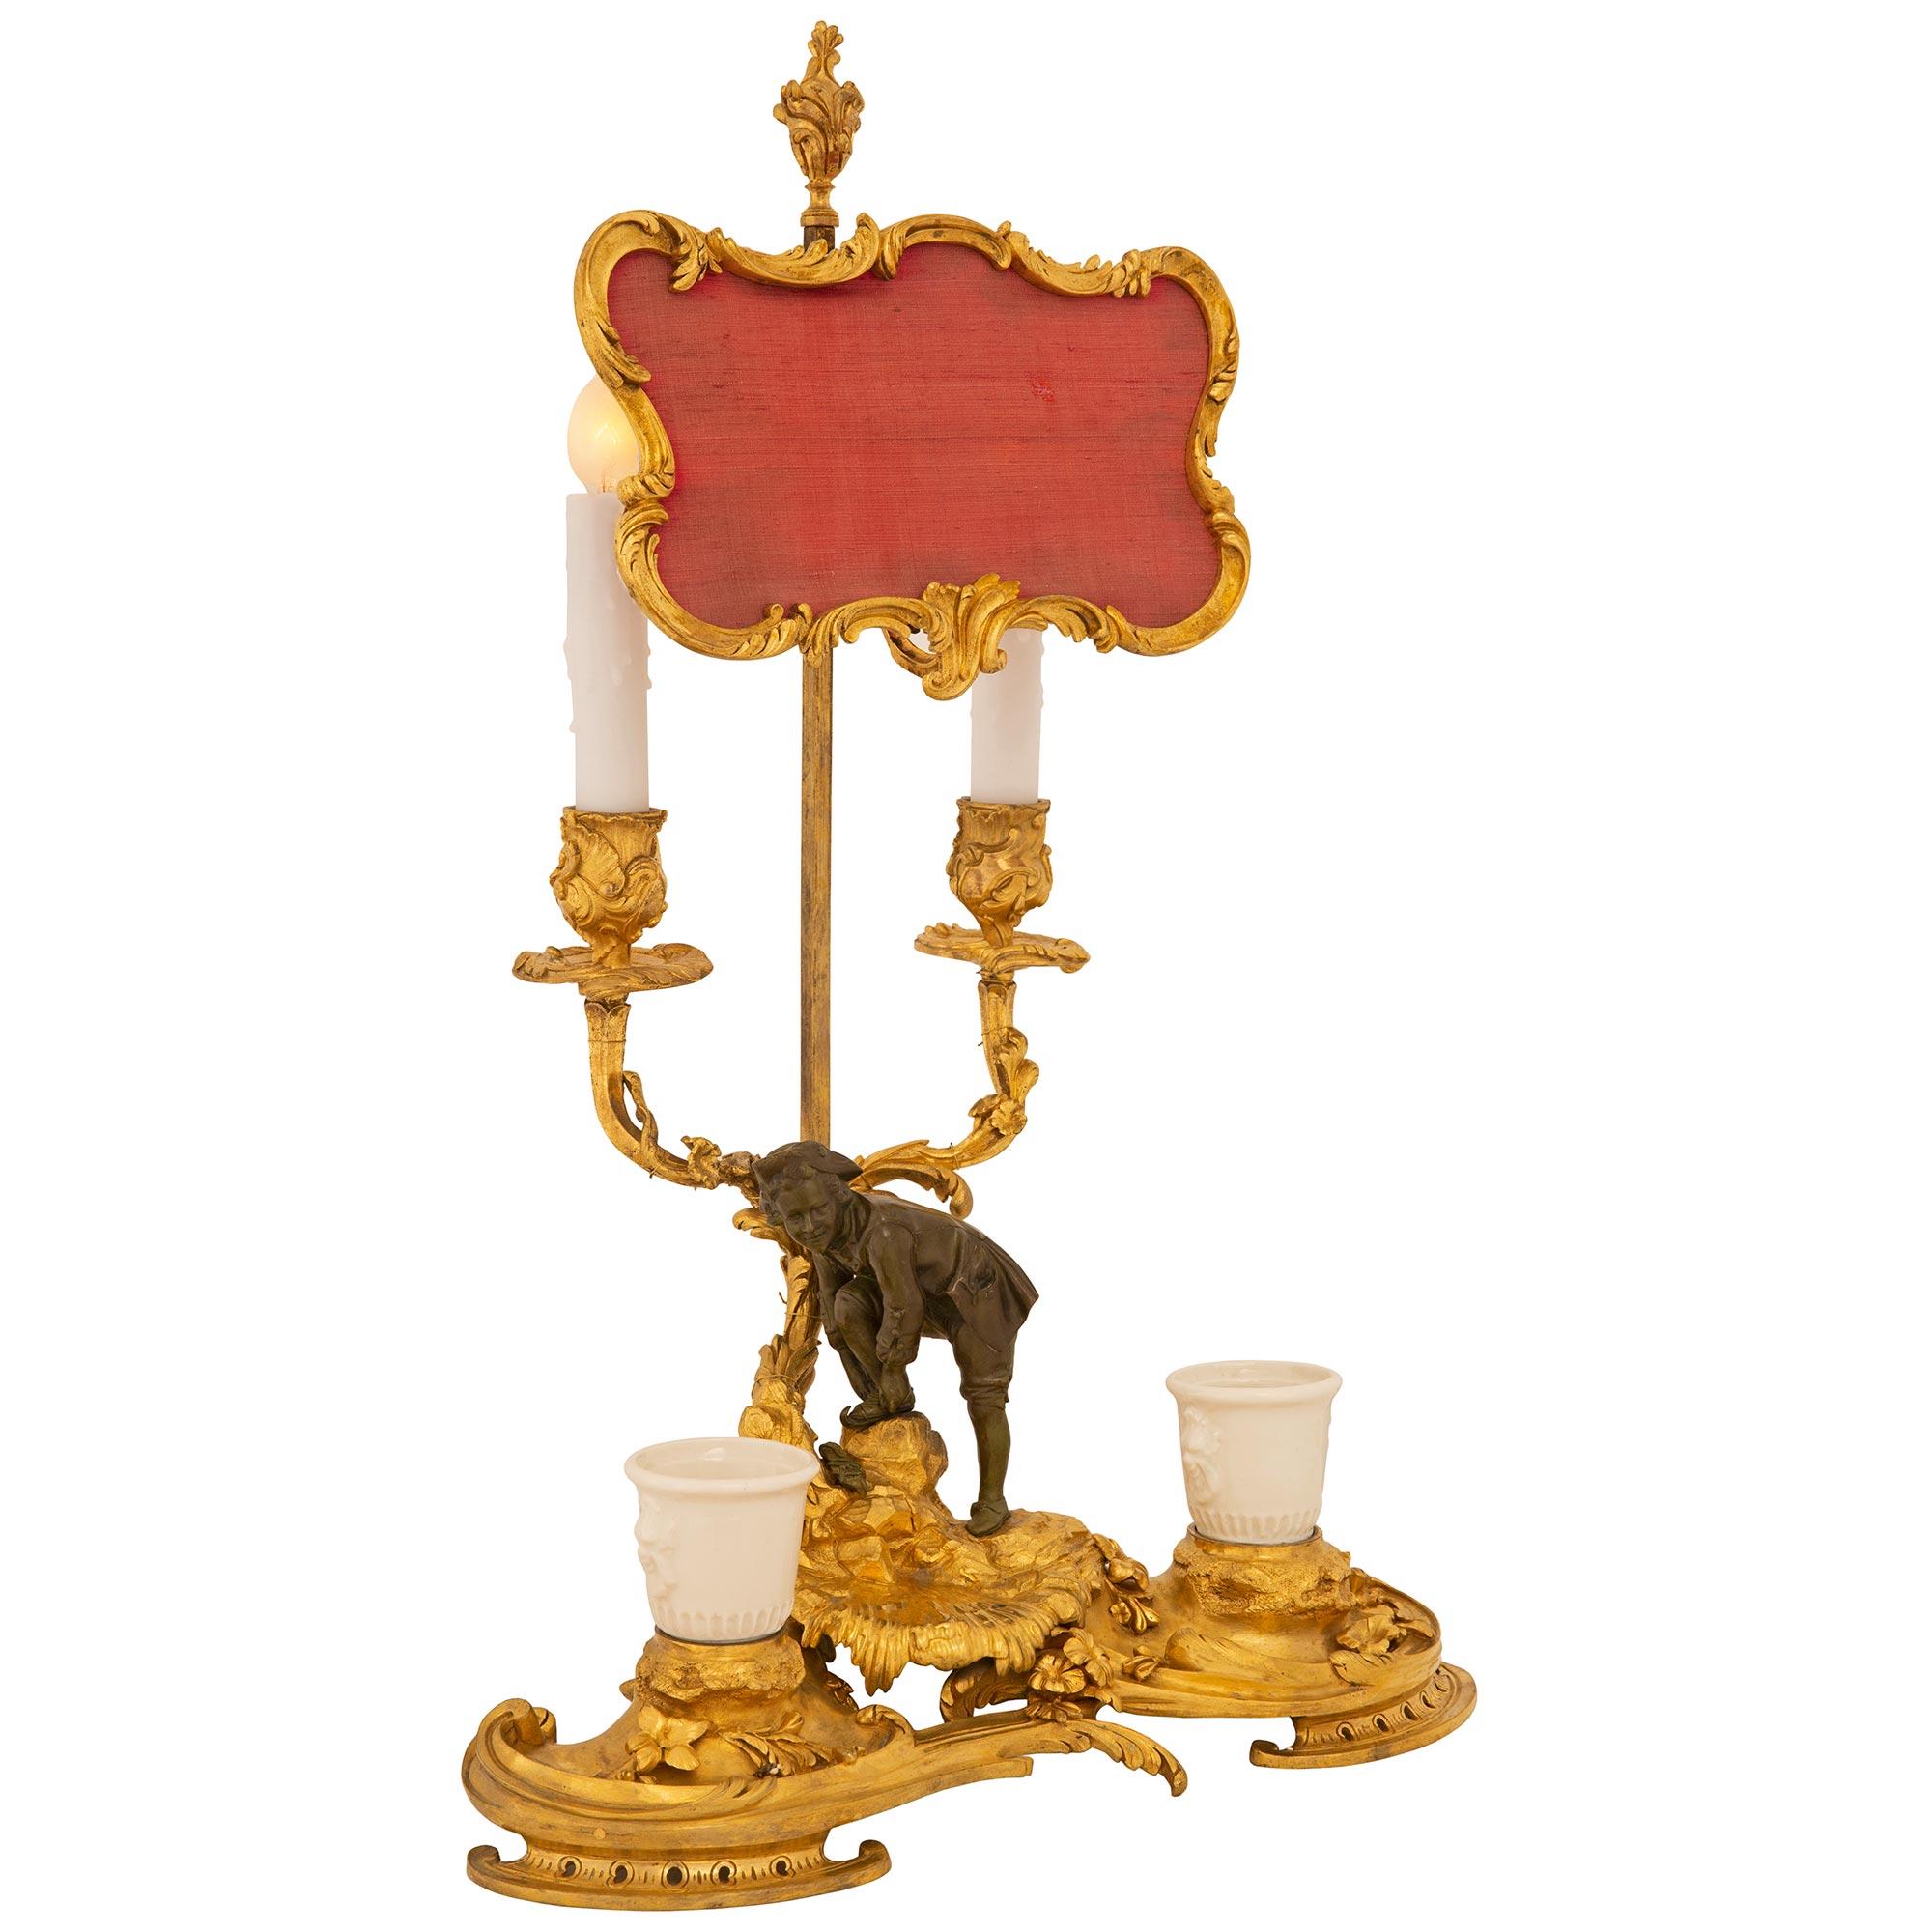 French Mid-19th Century Louis XV Style Ormolu Candelabra Lamp In Good Condition For Sale In West Palm Beach, FL